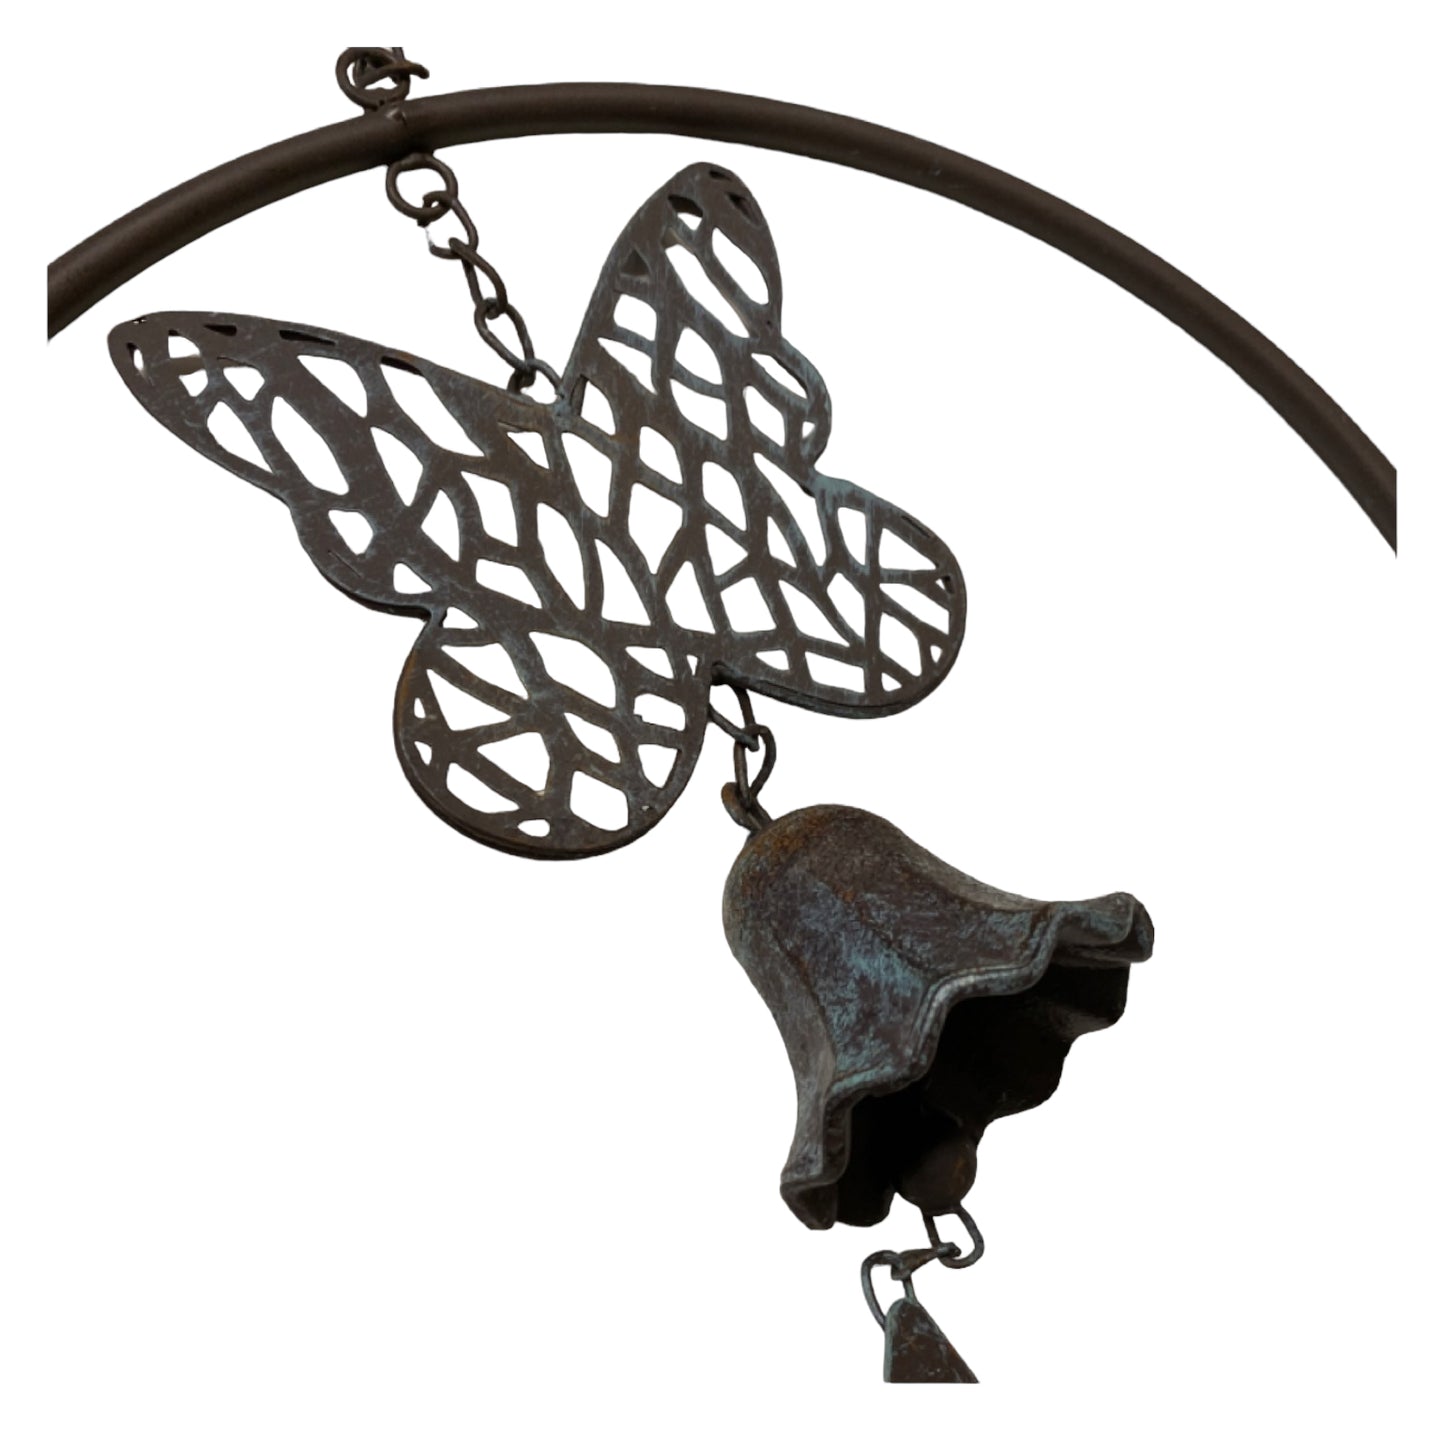 Wind Chime Bell Vintage Butterfly Ring